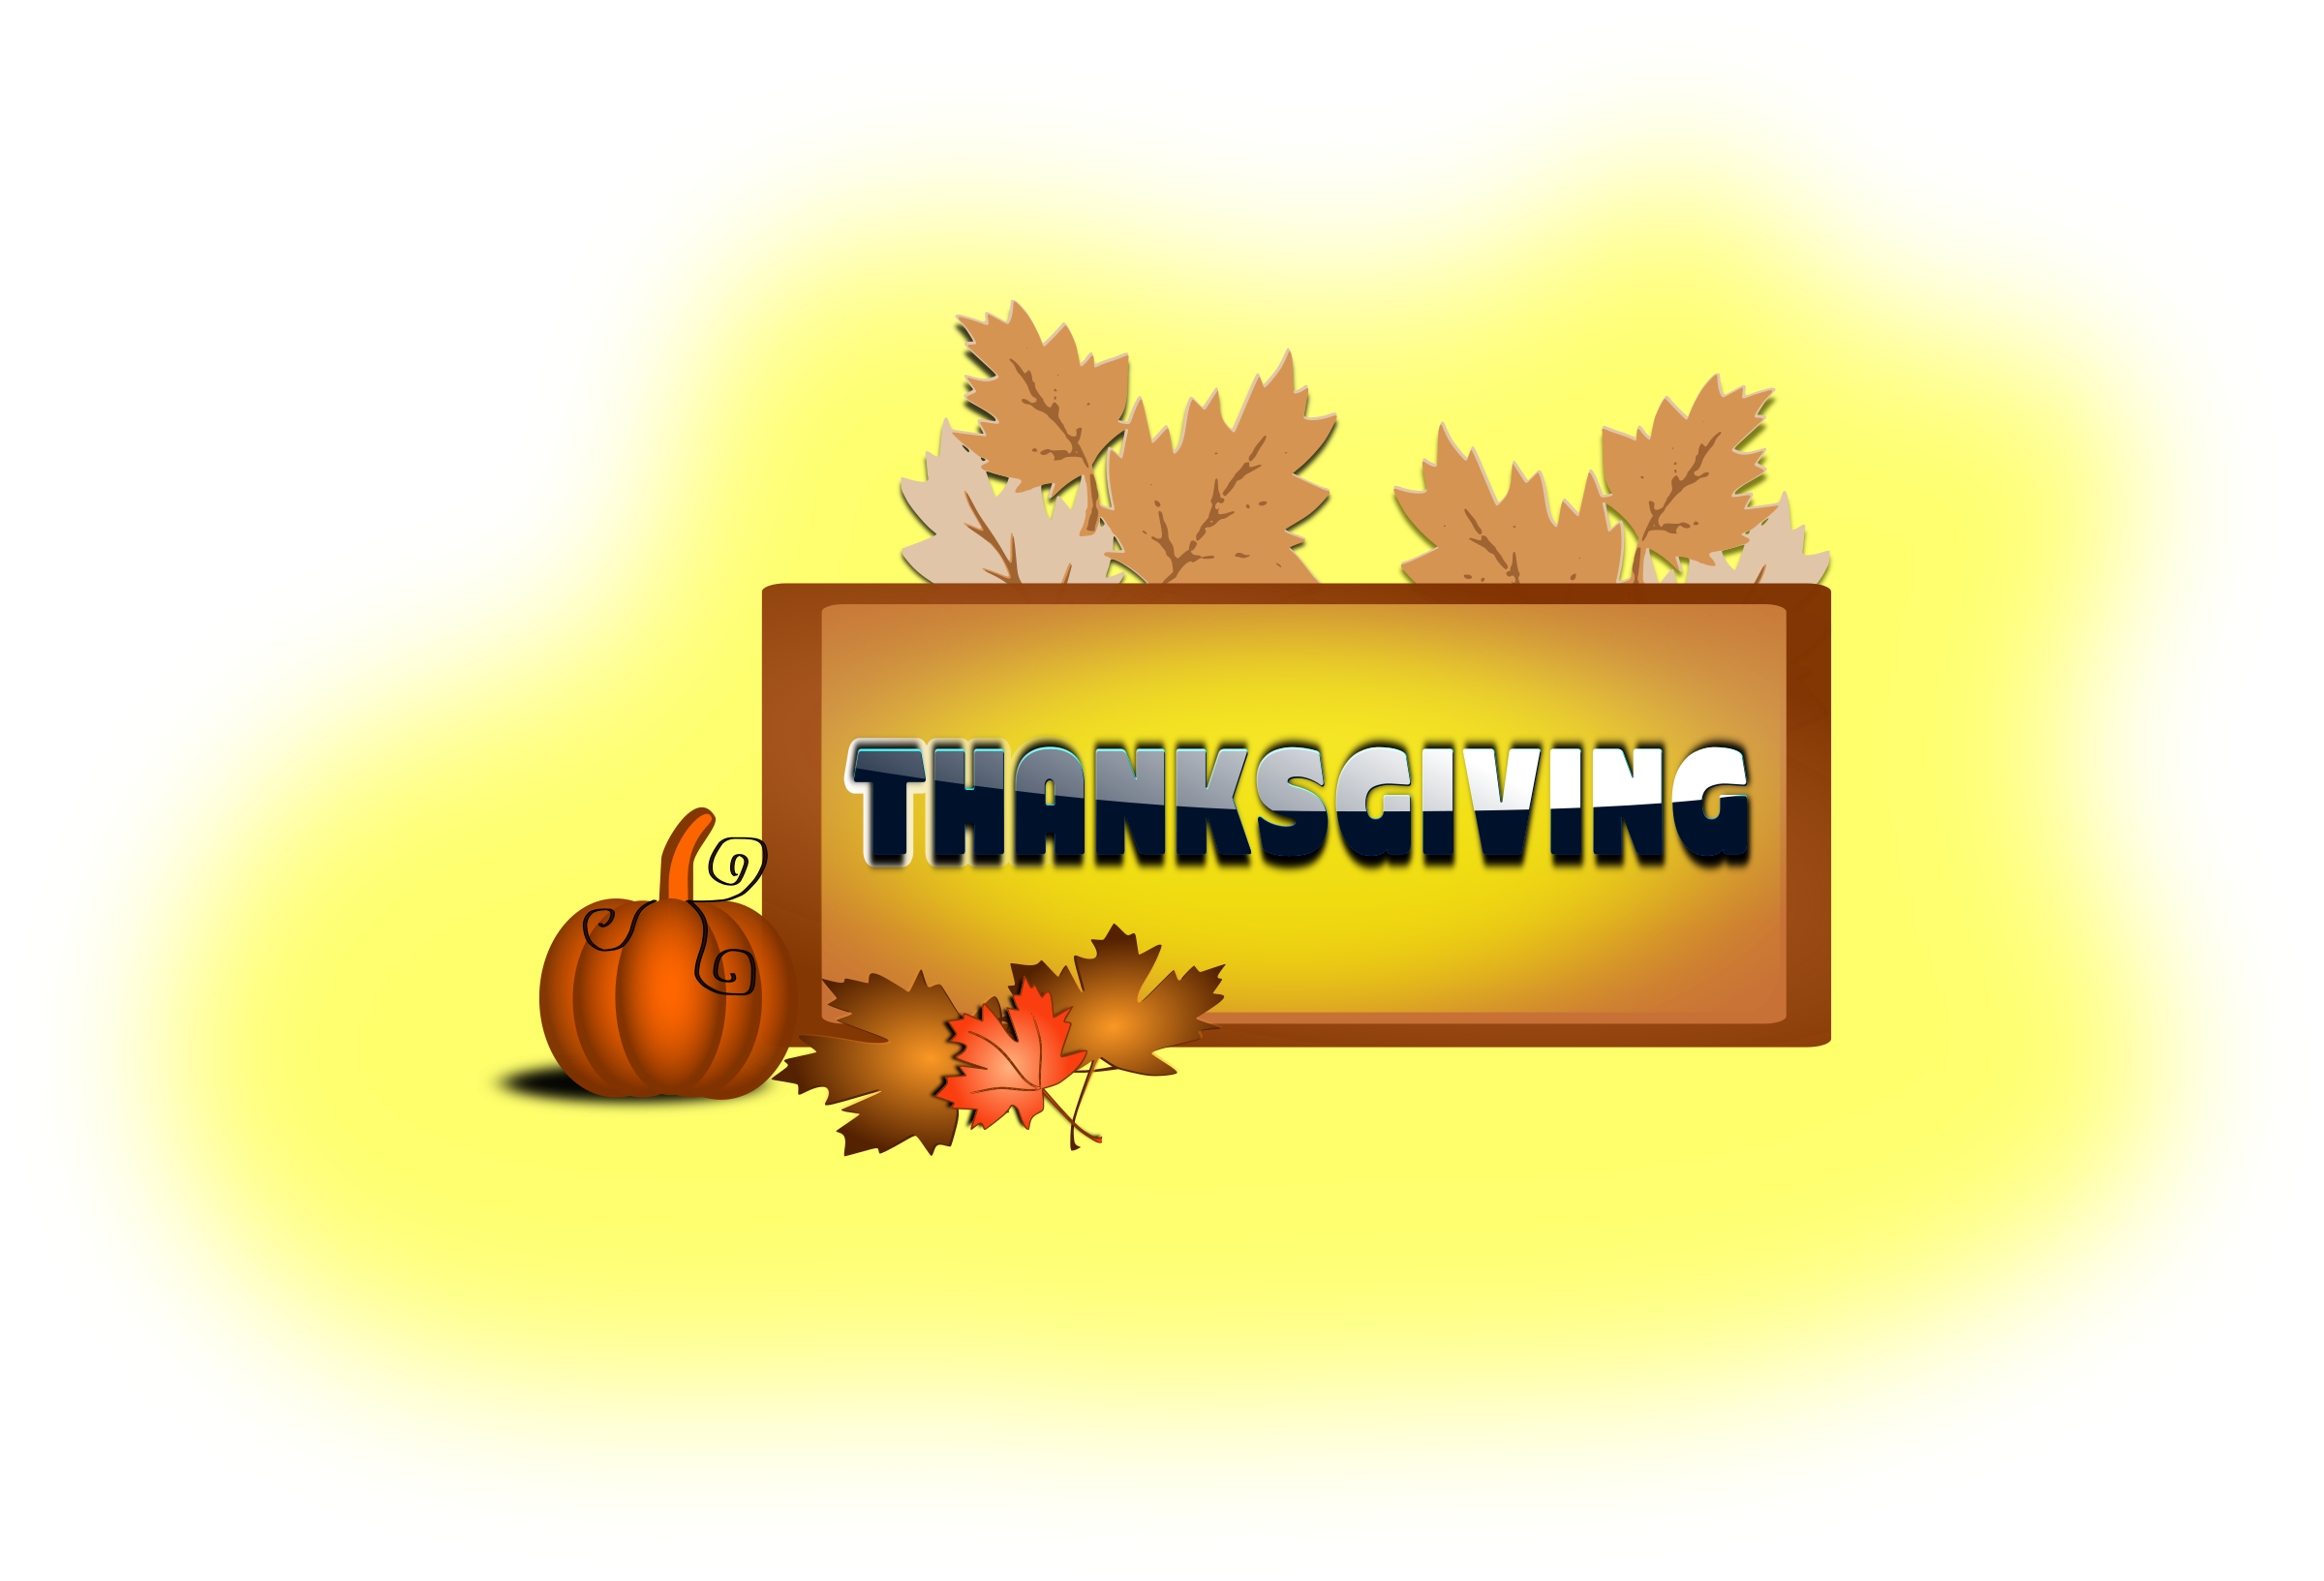 microsoft office clipart thanksgiving - photo #4